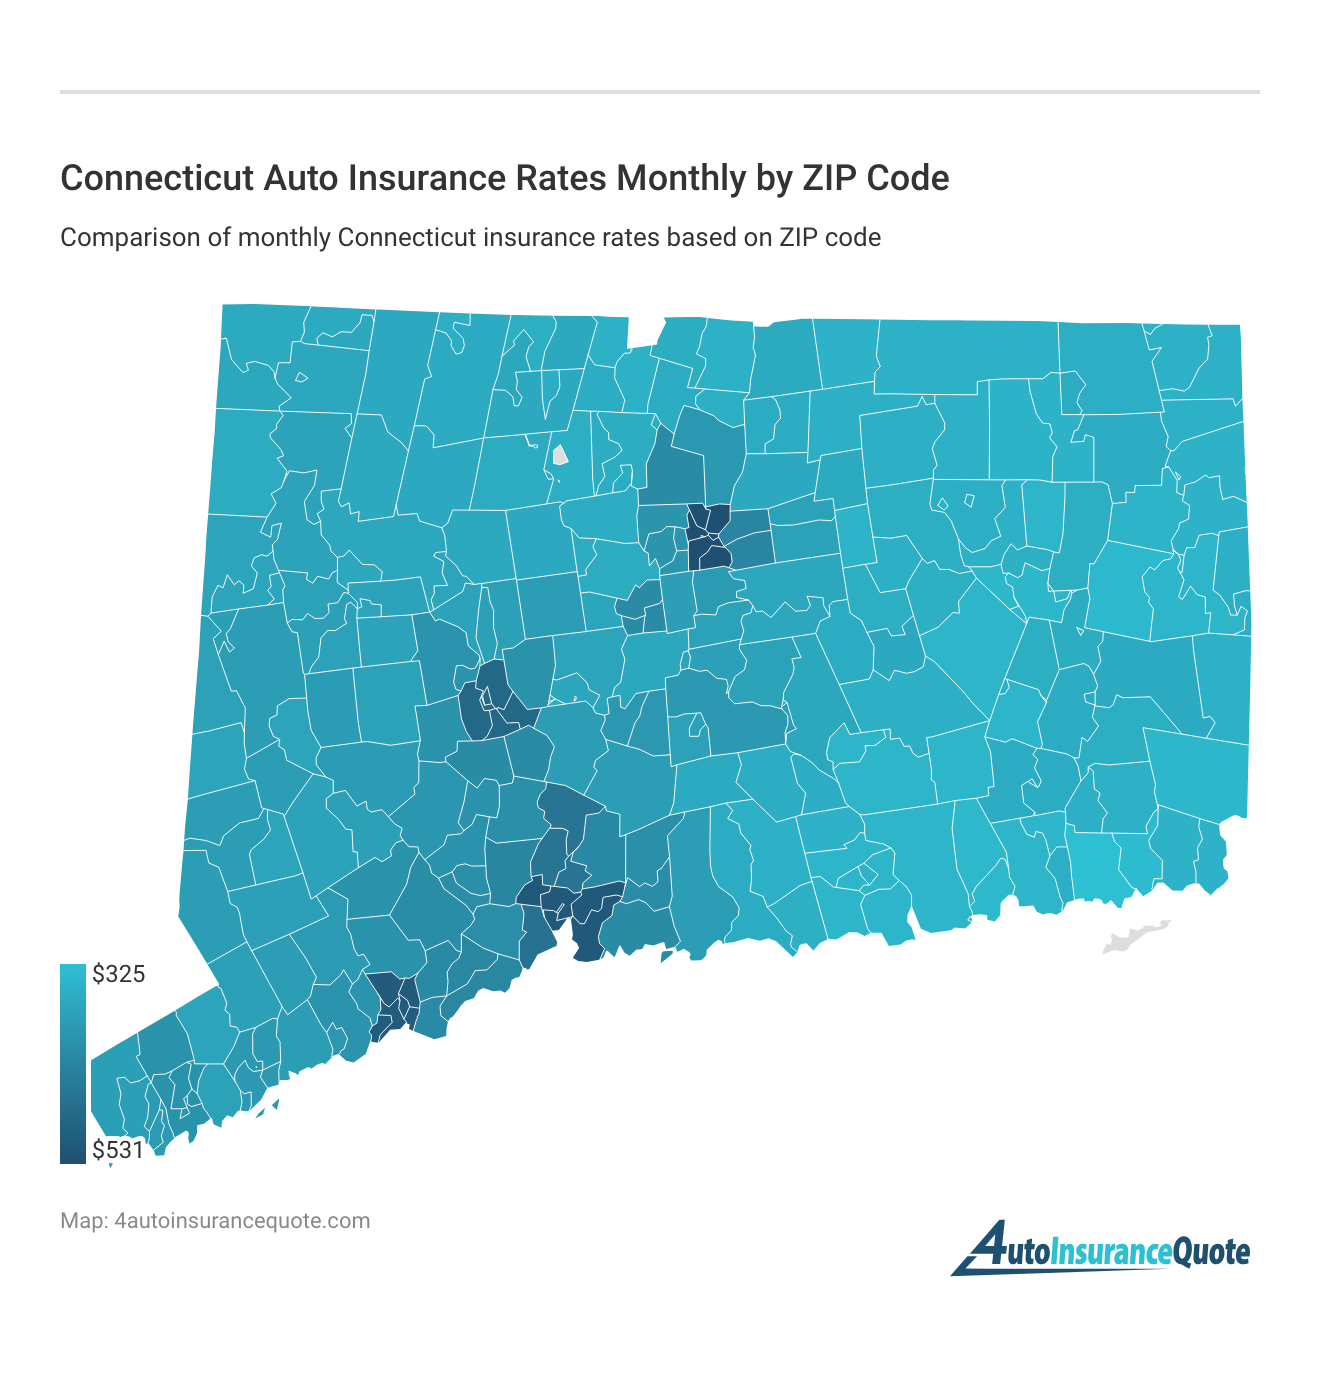 <h3>Connecticut Auto Insurance Rates Monthly by ZIP Code</h3>